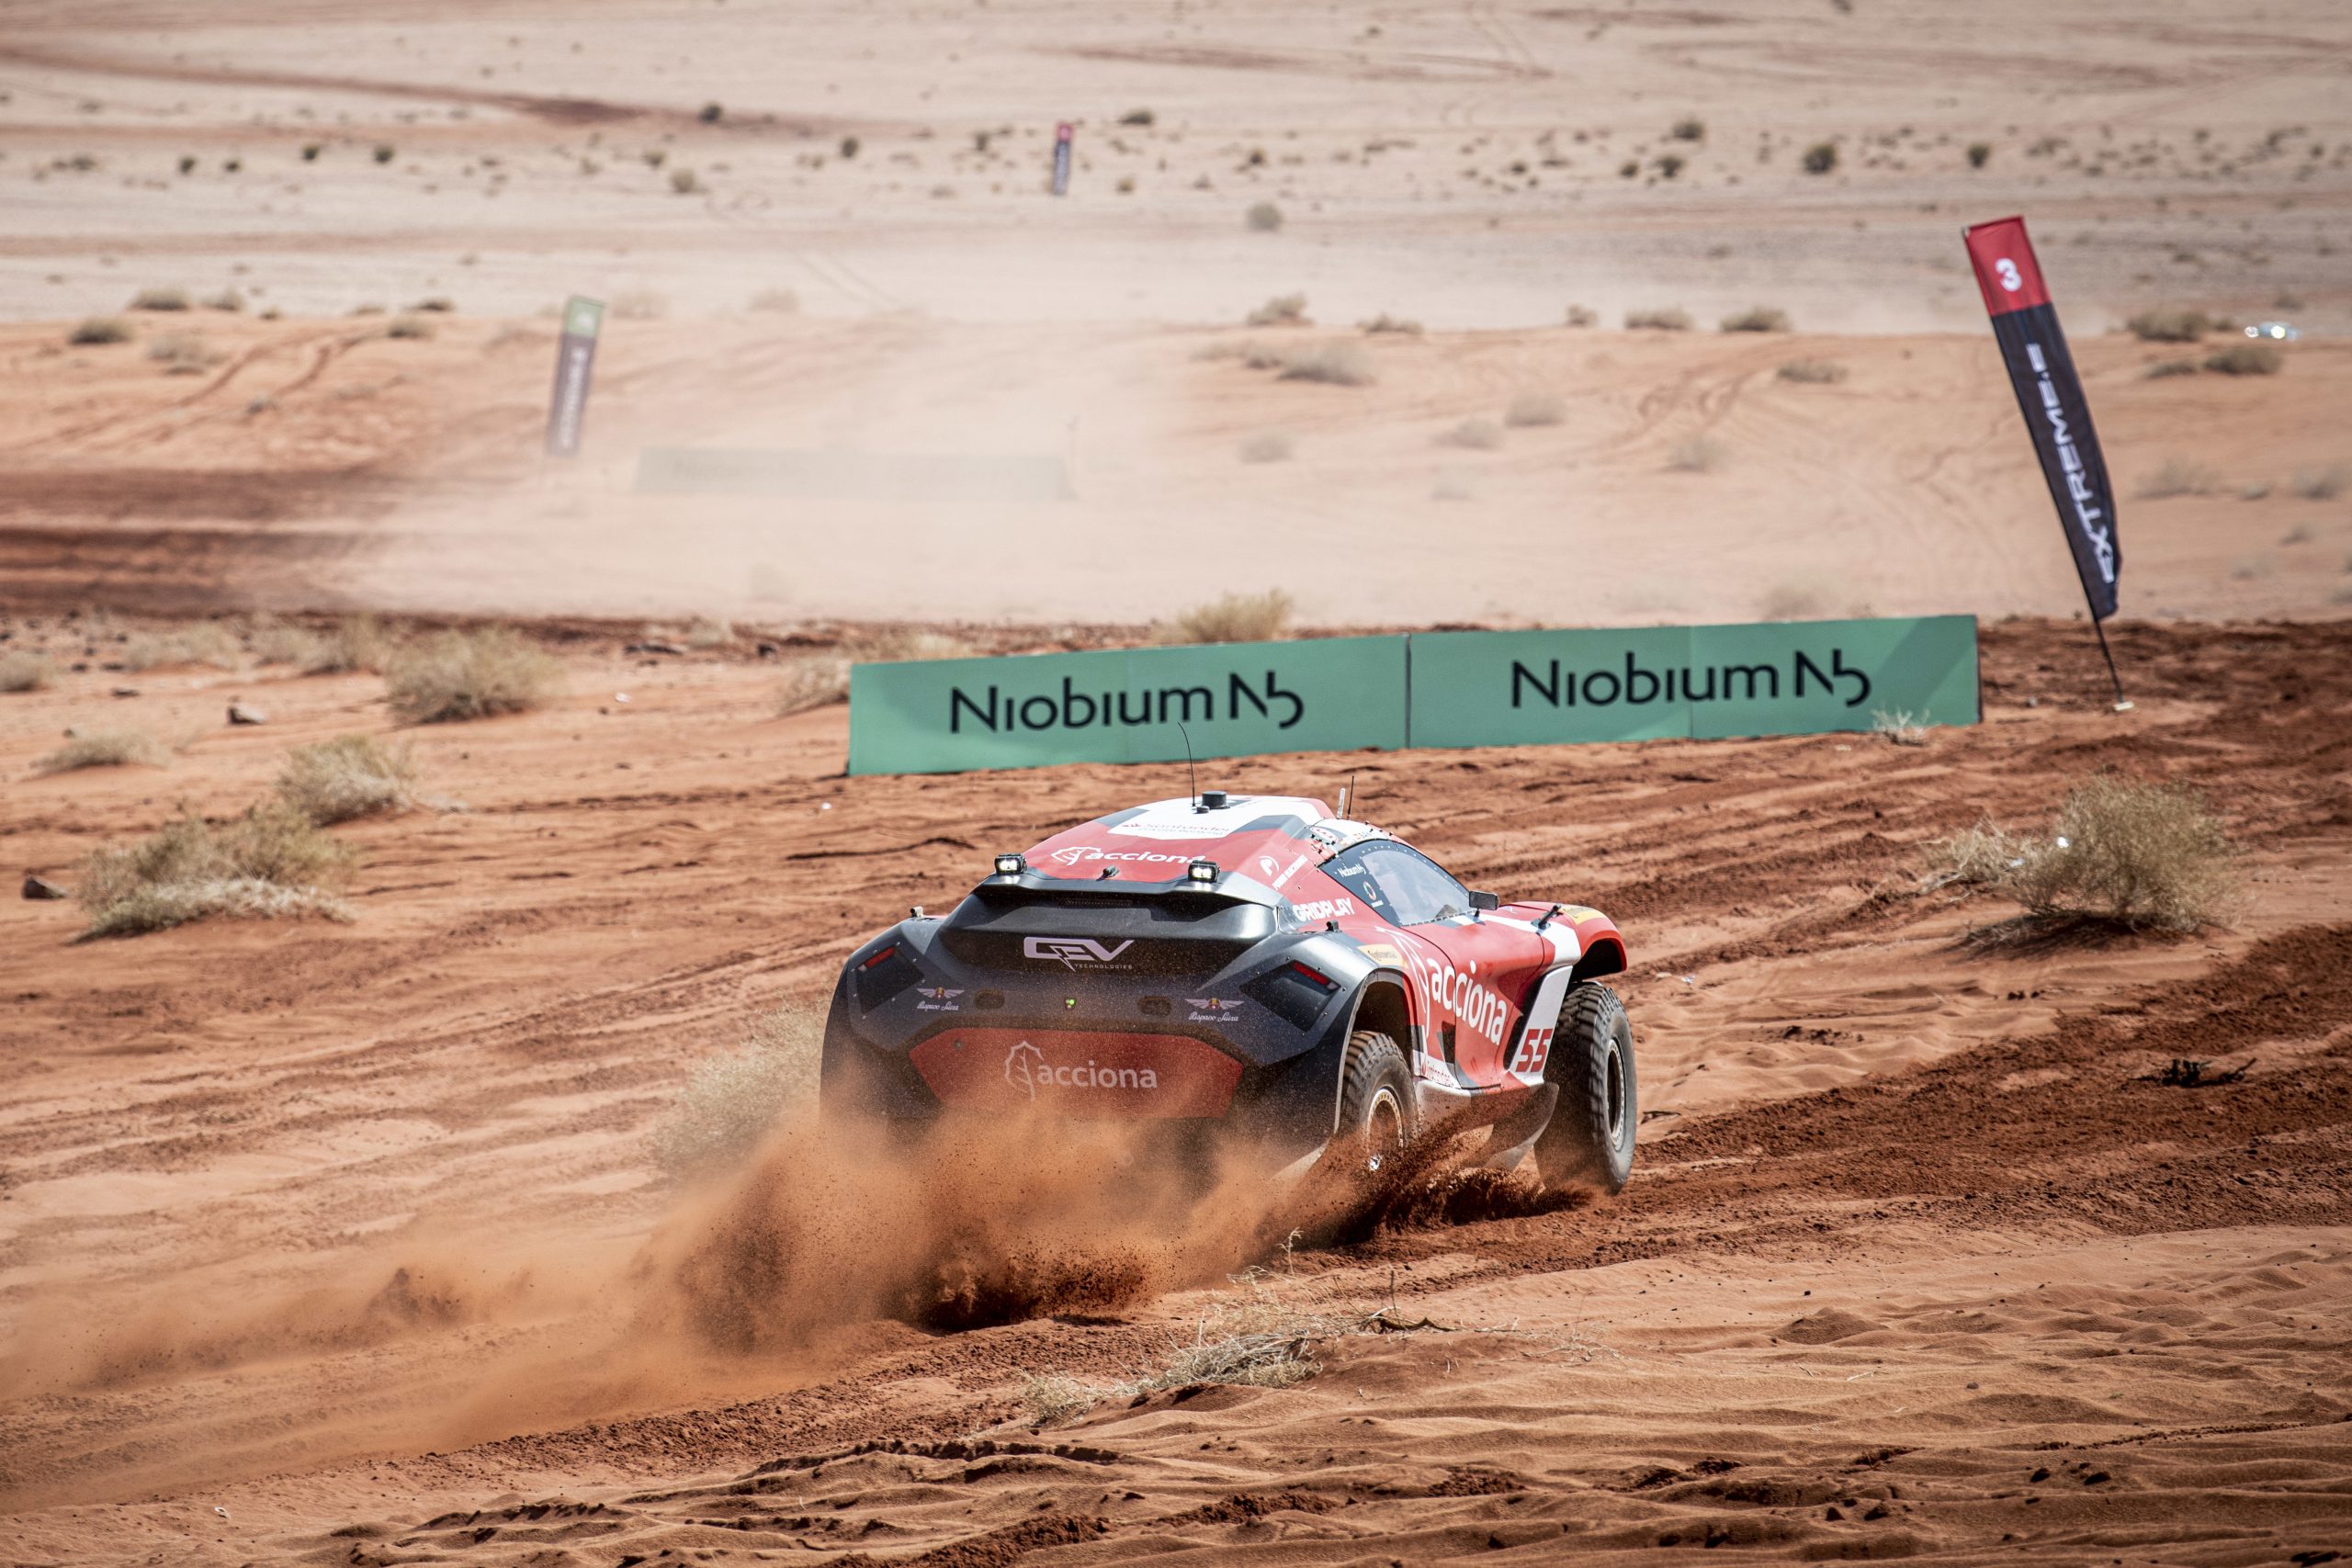 ACCIONA | SAINZ XE Team is second at the Desert X Prix, its best result to date, QEV